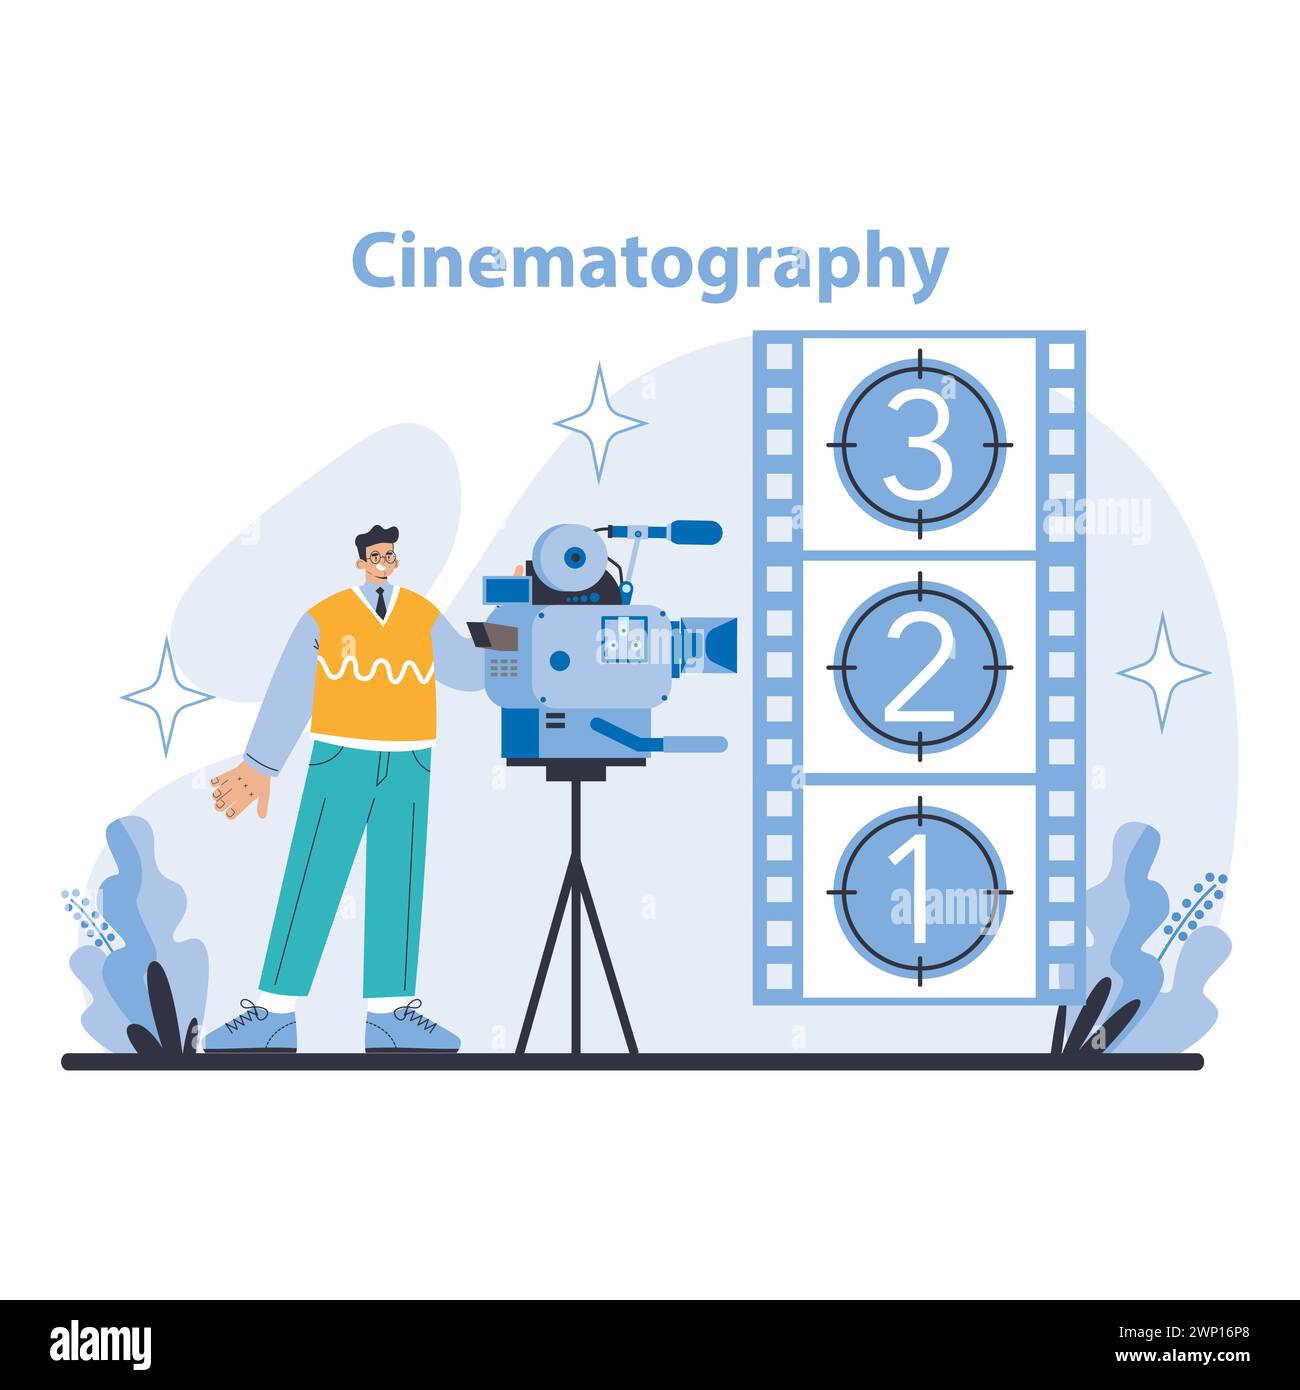 Cinematography concept. The art of filmmaking and visual storytelling. Director's craft in movie production. Film industry technology and evolution. Flat vector illustration. Stock Vector